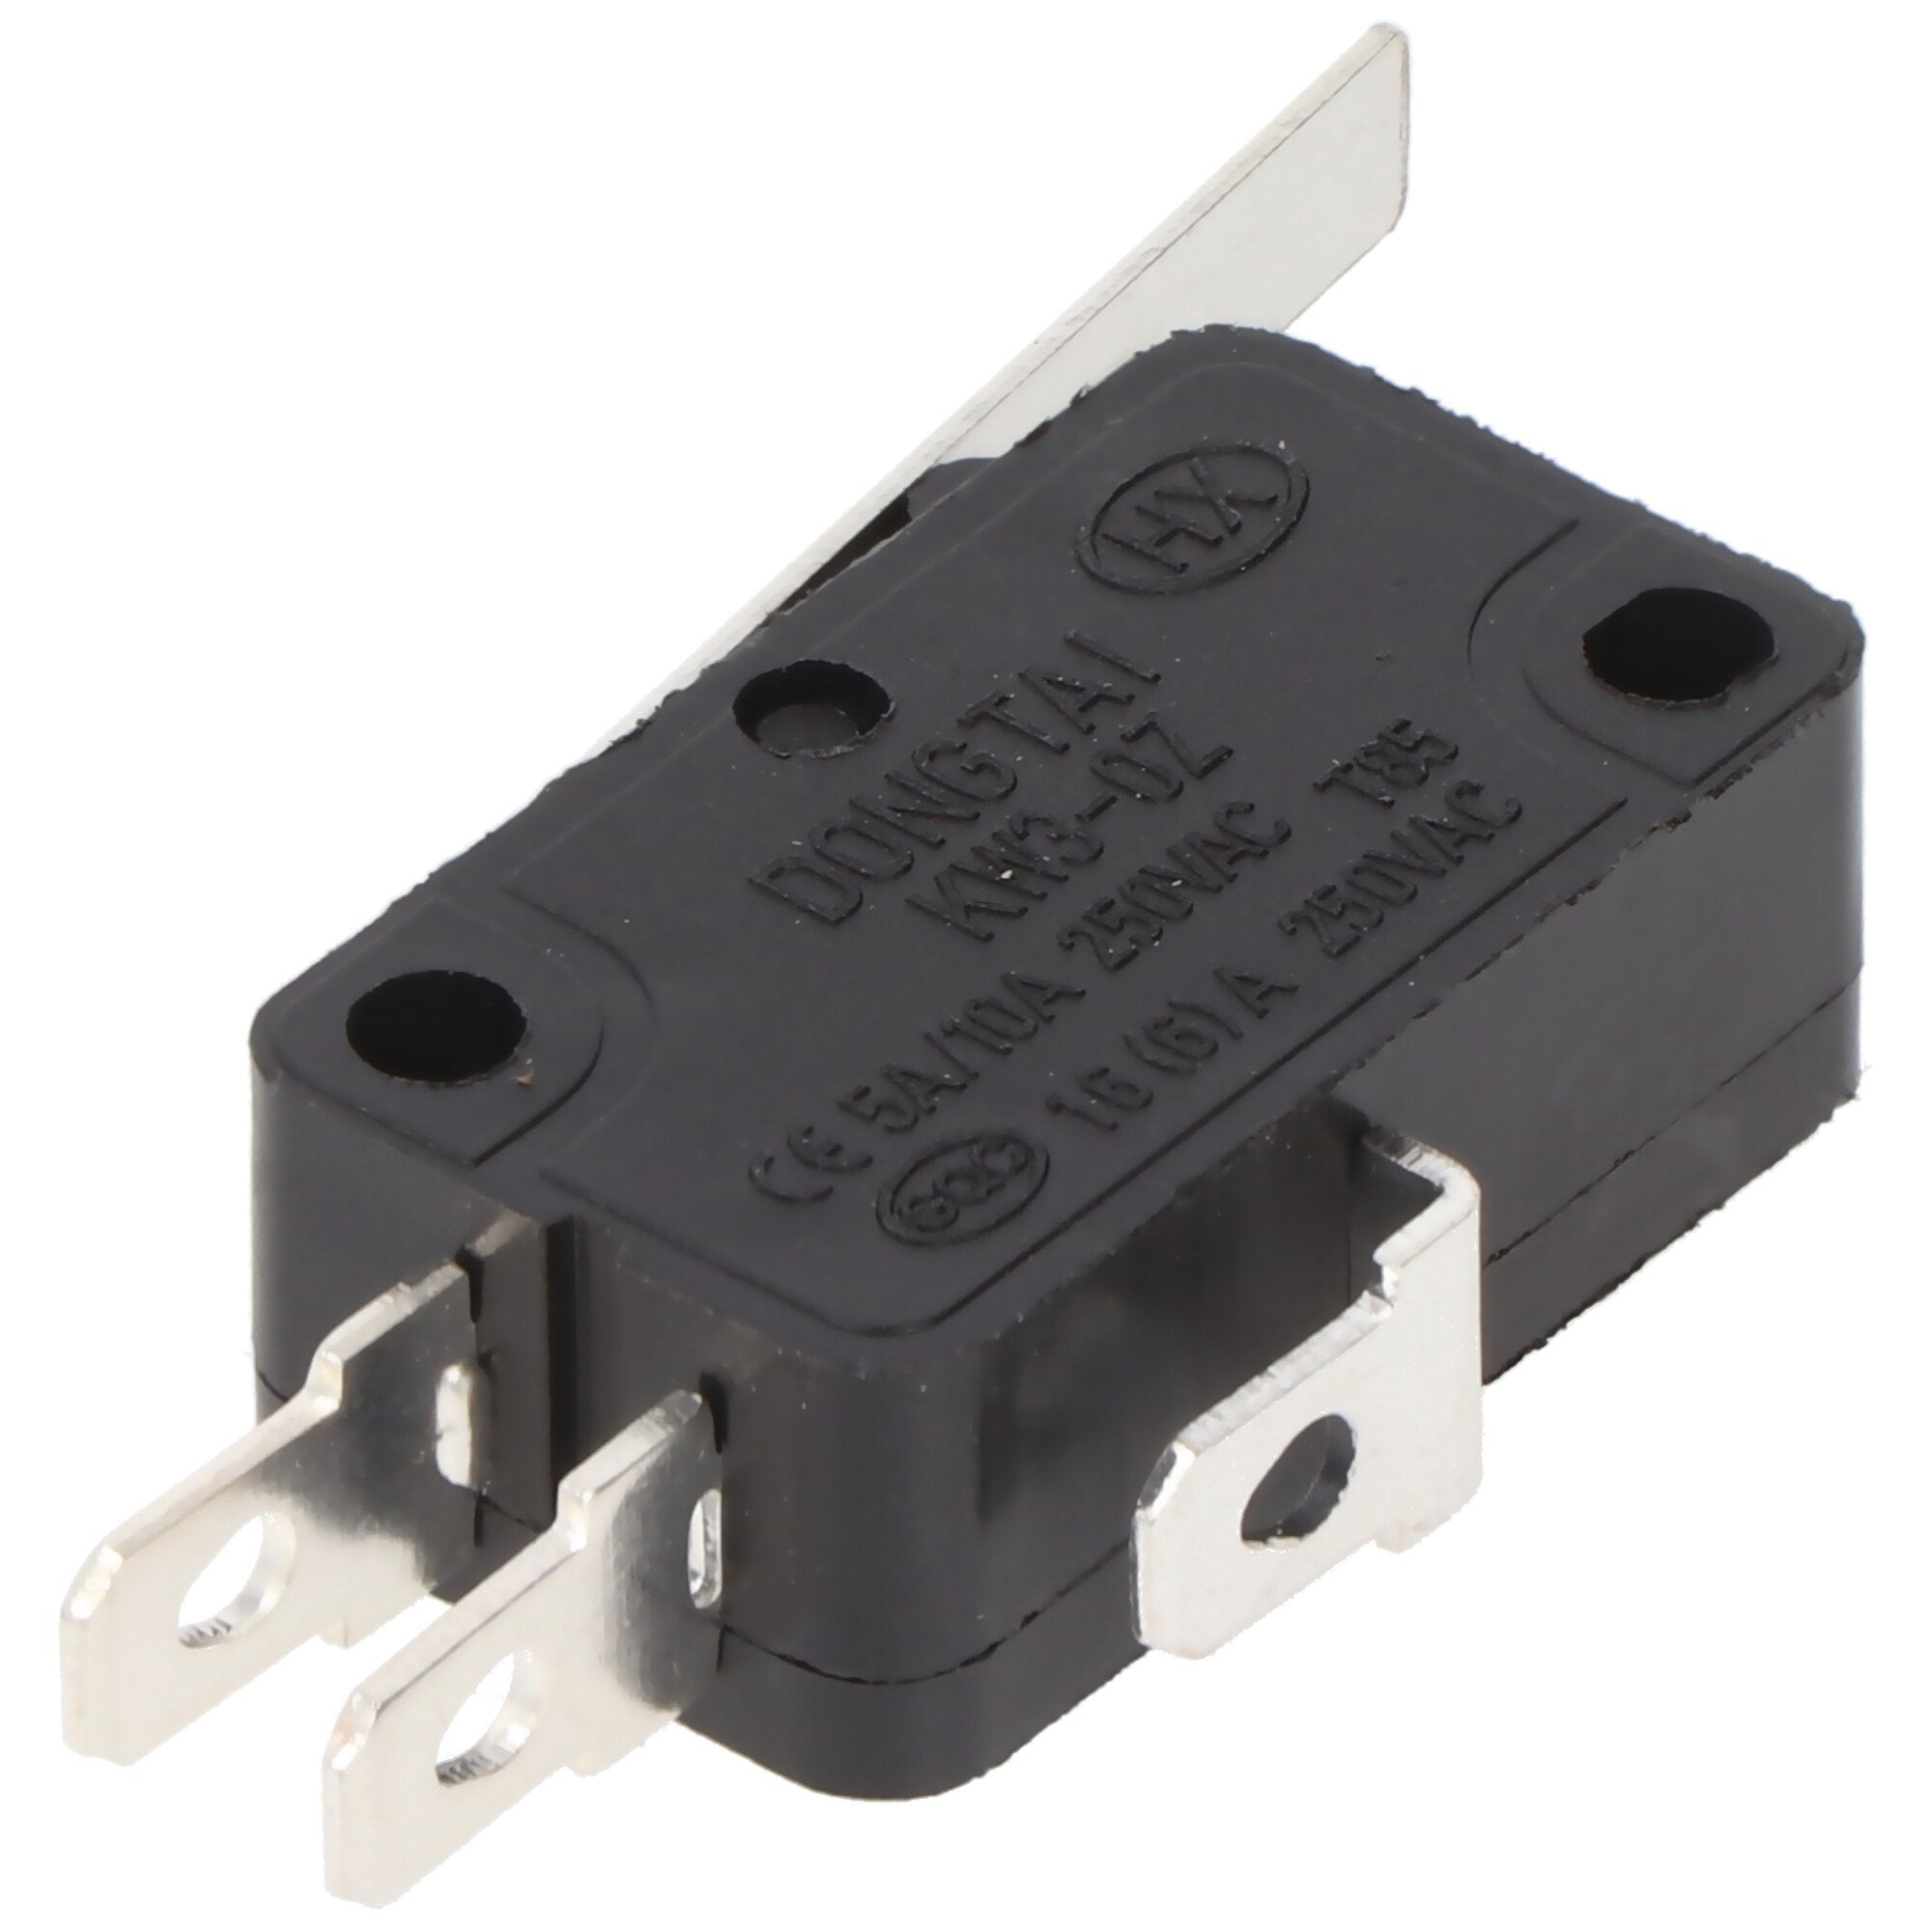 Goobay microswitch - changeover switch, 1-pole - with a straight lever